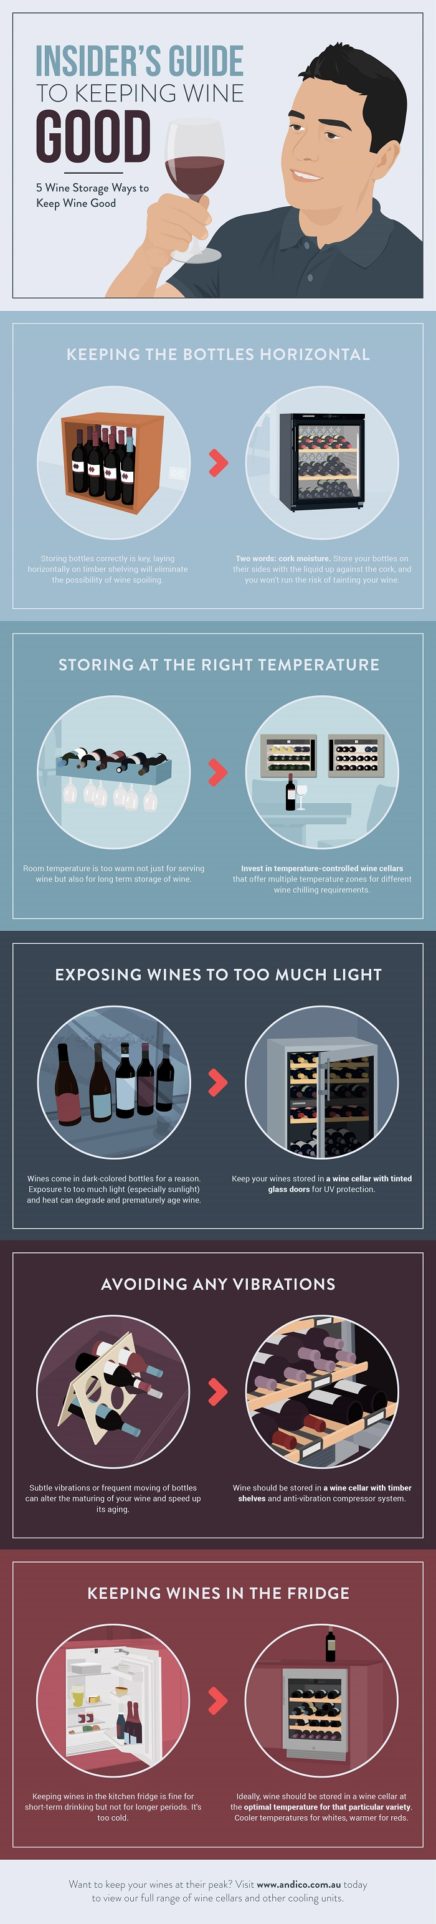 5 Ways to Store Wine to Keep it Good